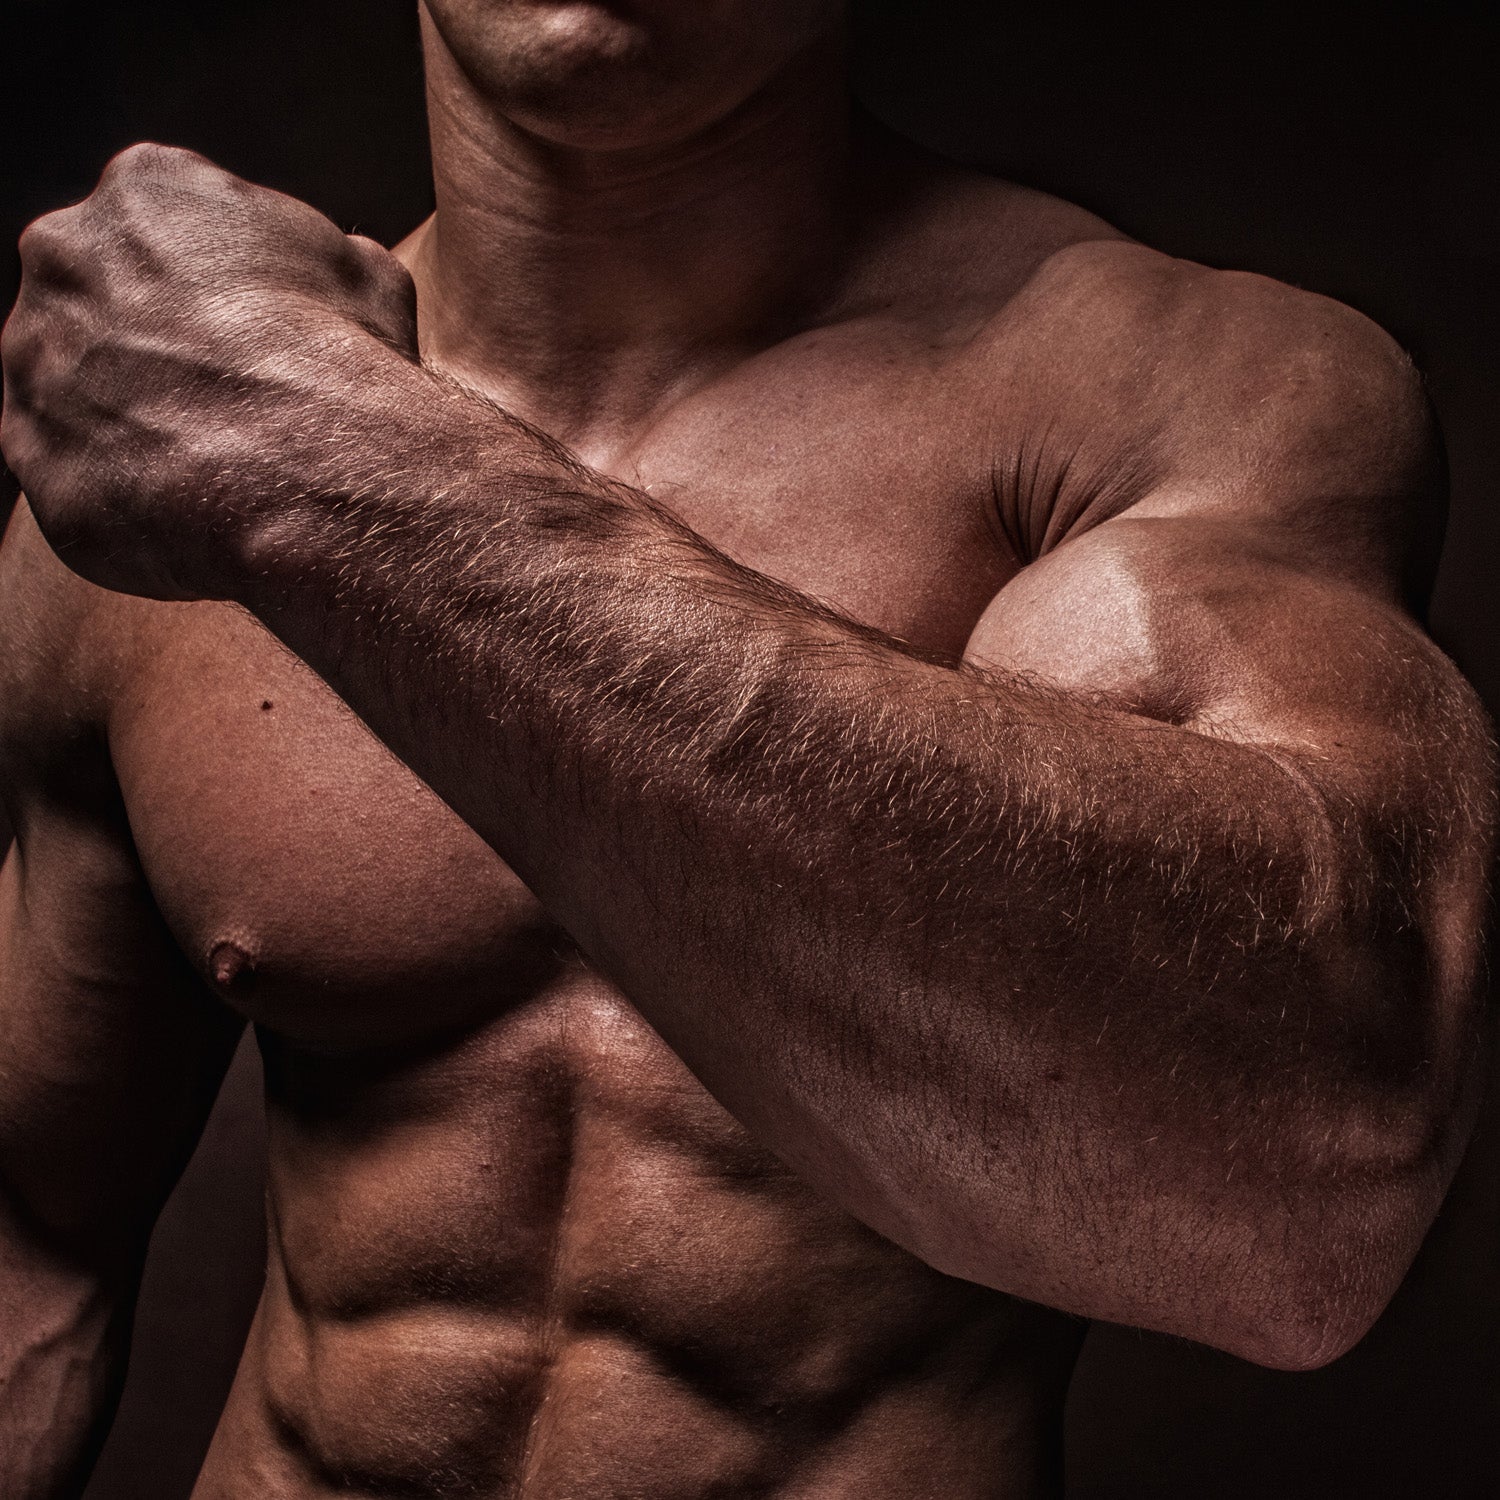 5 Sure-Fire Ways To Build Bigger, Better Arms